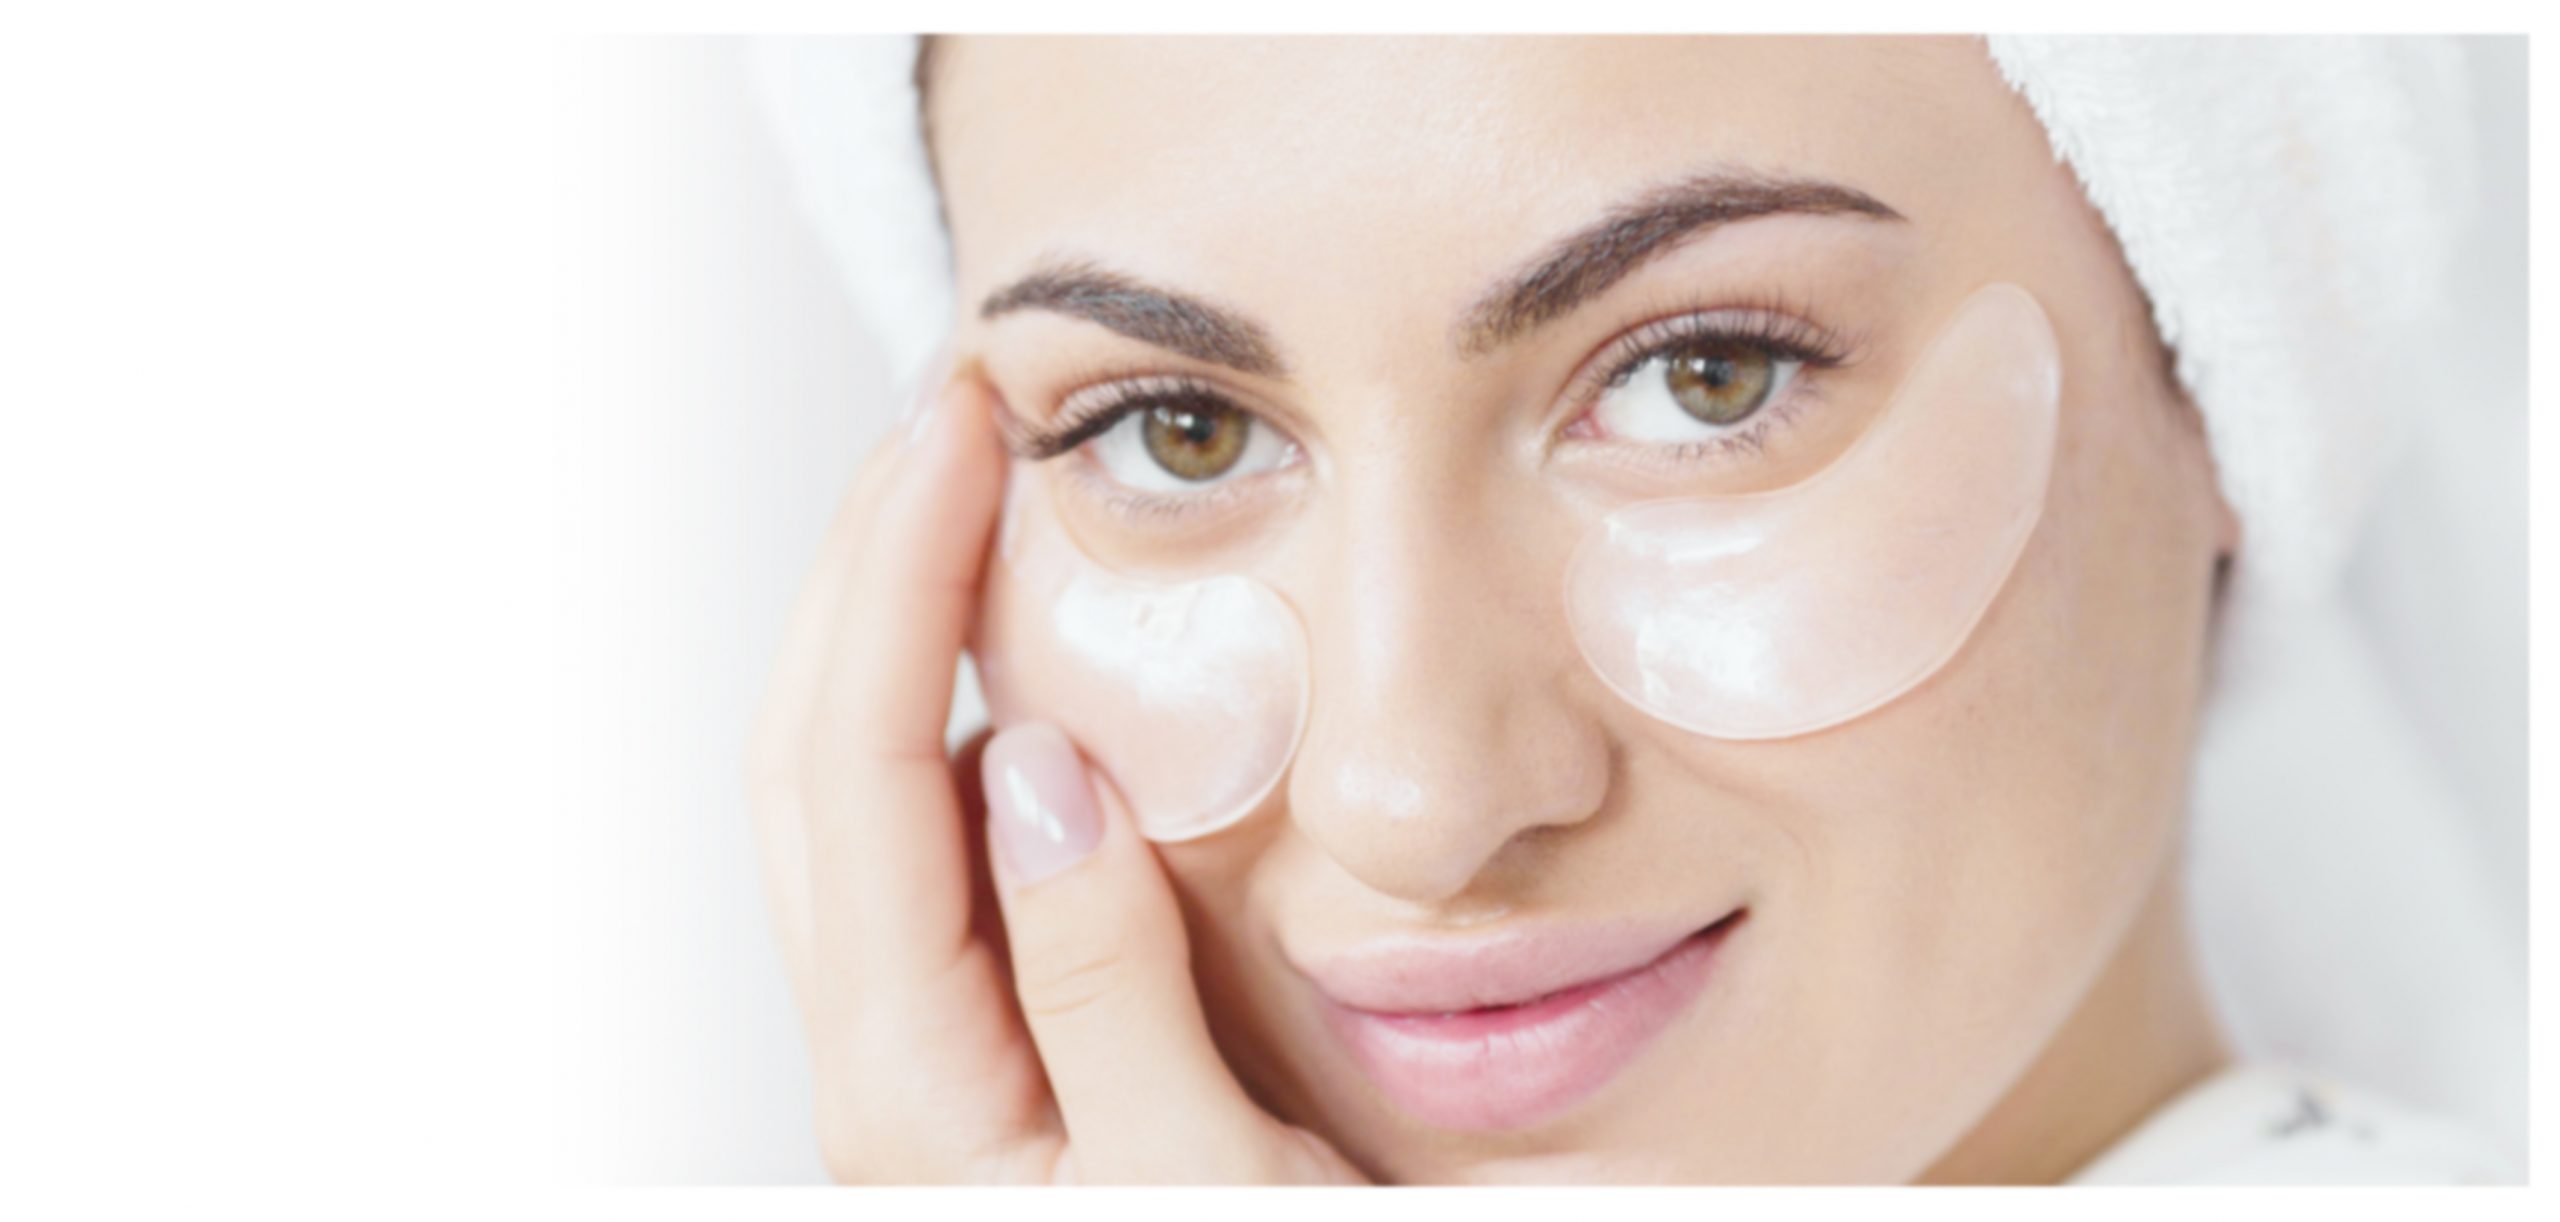 A lady applying soluble hydrogel eye patches